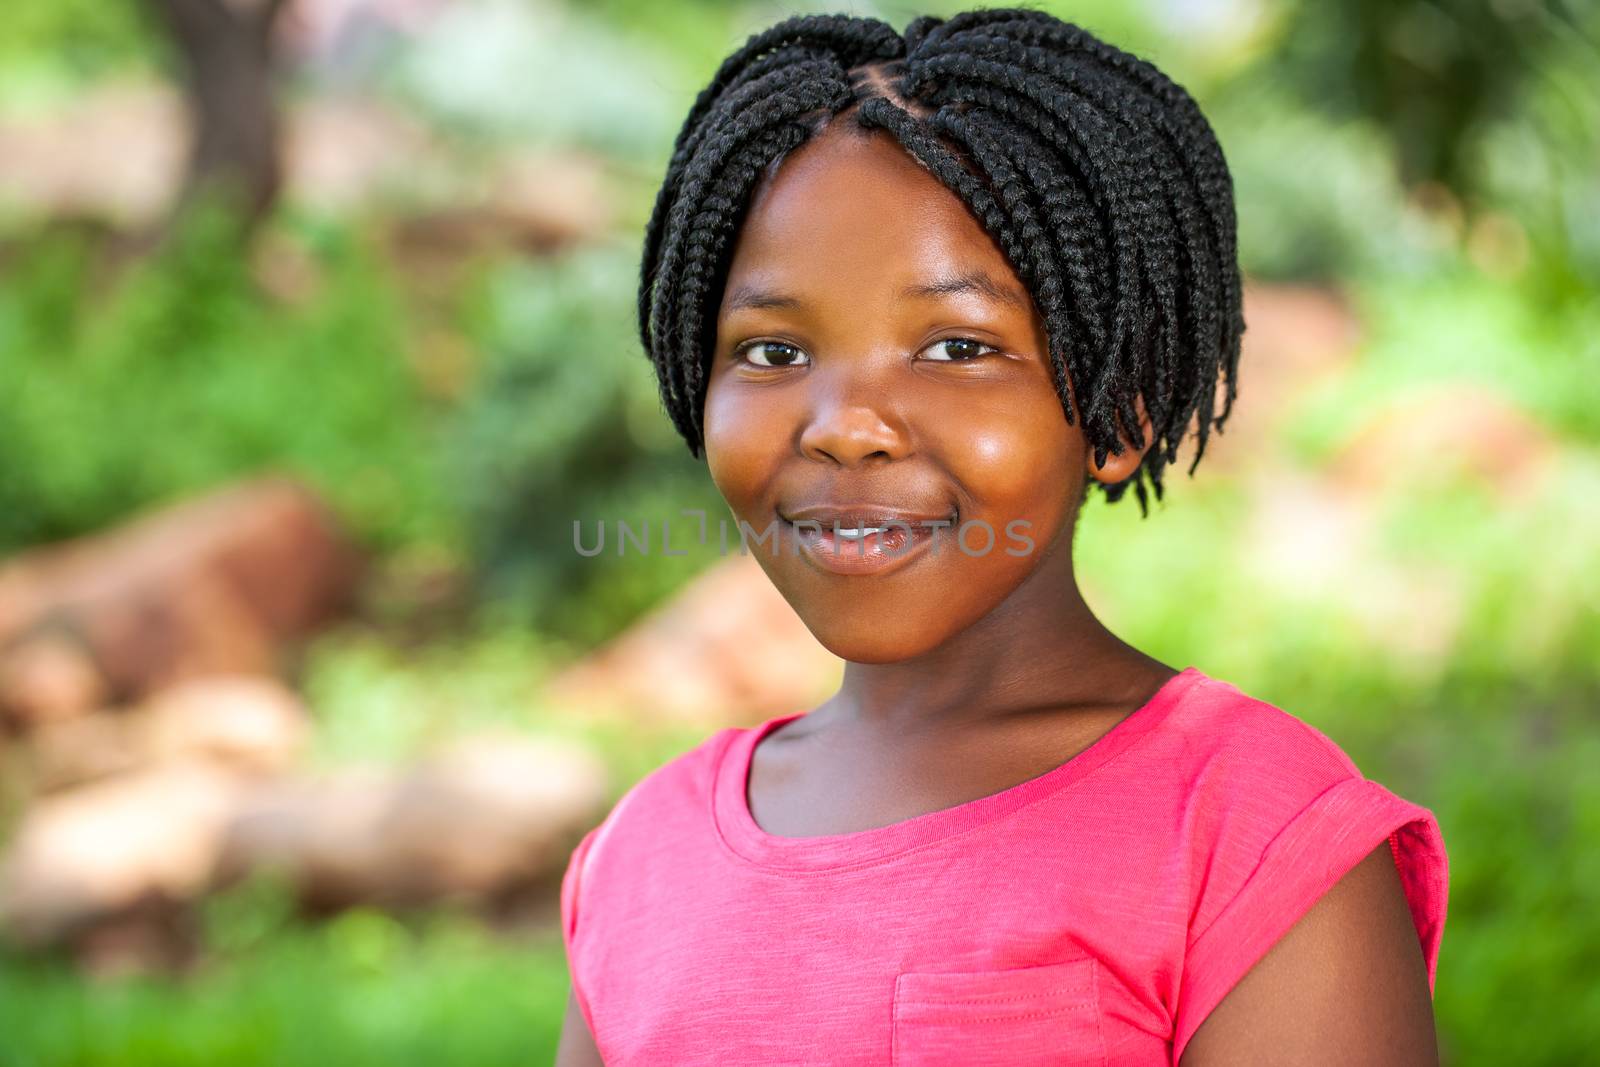 Young African girl with braids. by karelnoppe